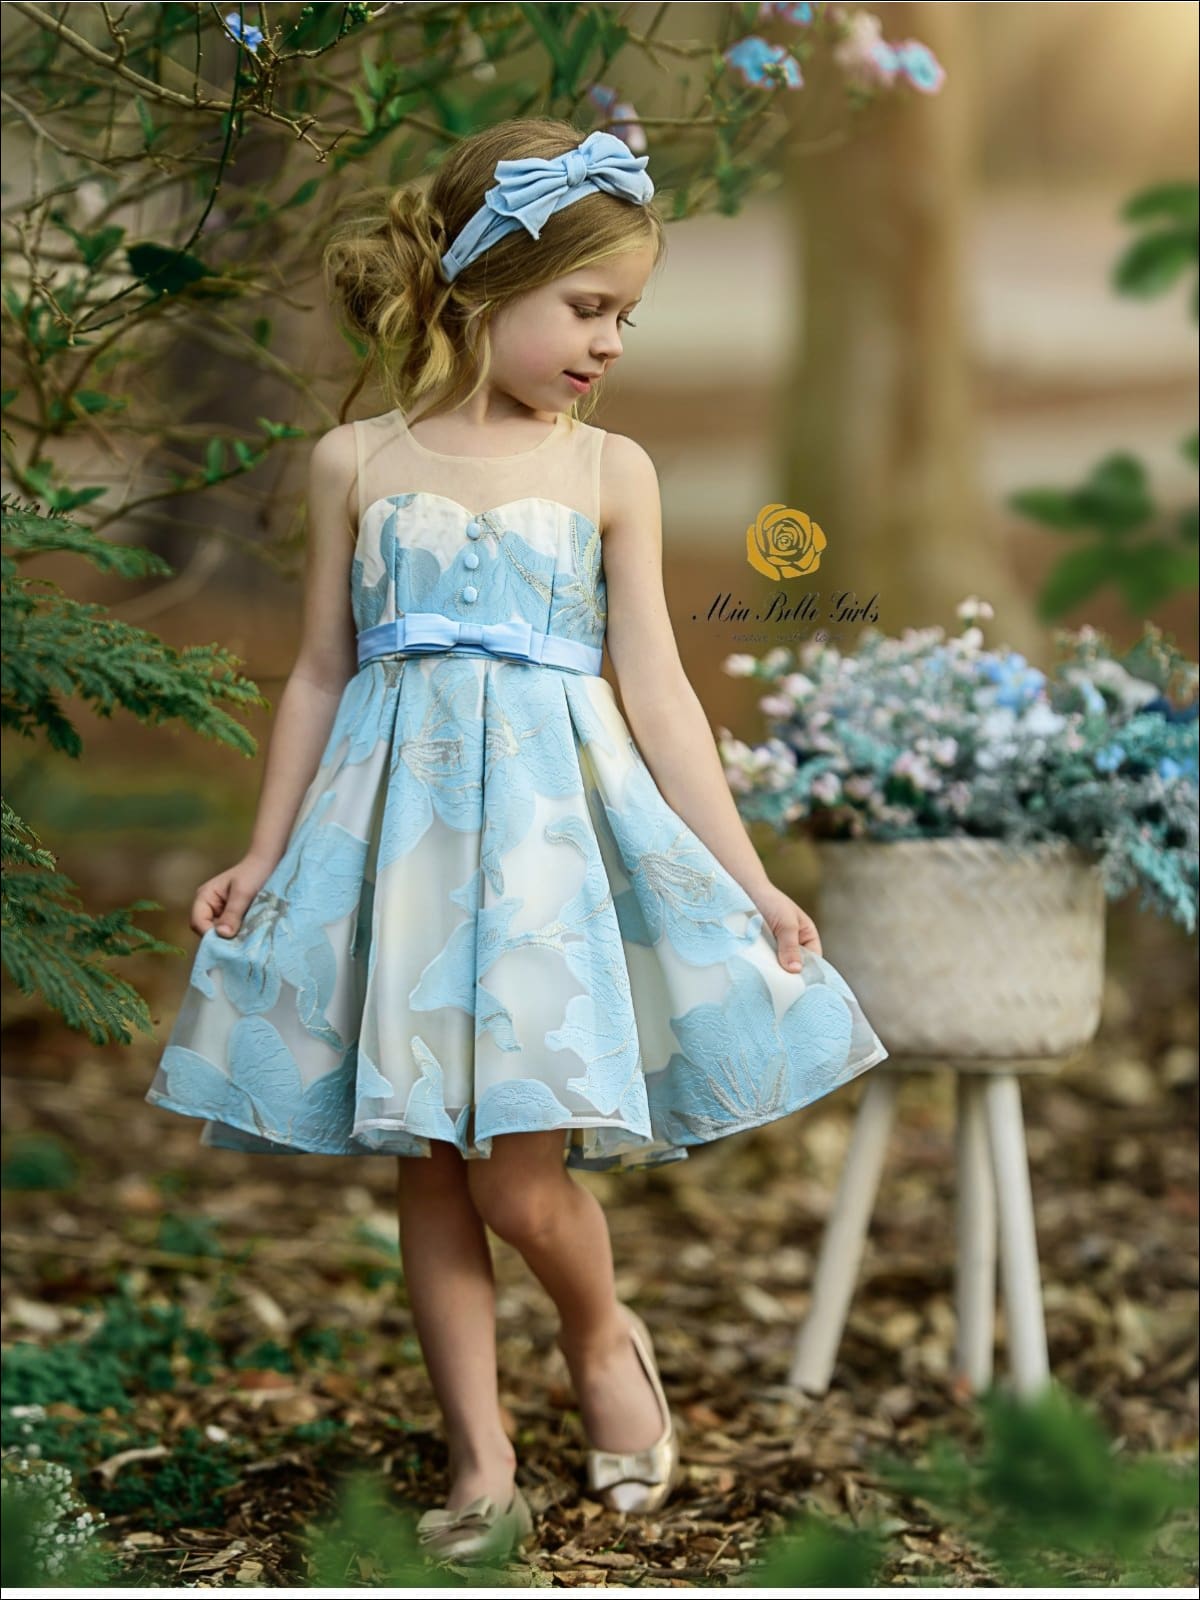 Girls Sleeveless Floral Embroidered Pleated Special Occasion Dress - Blue / 3T - Girls Spring Dressy Dress